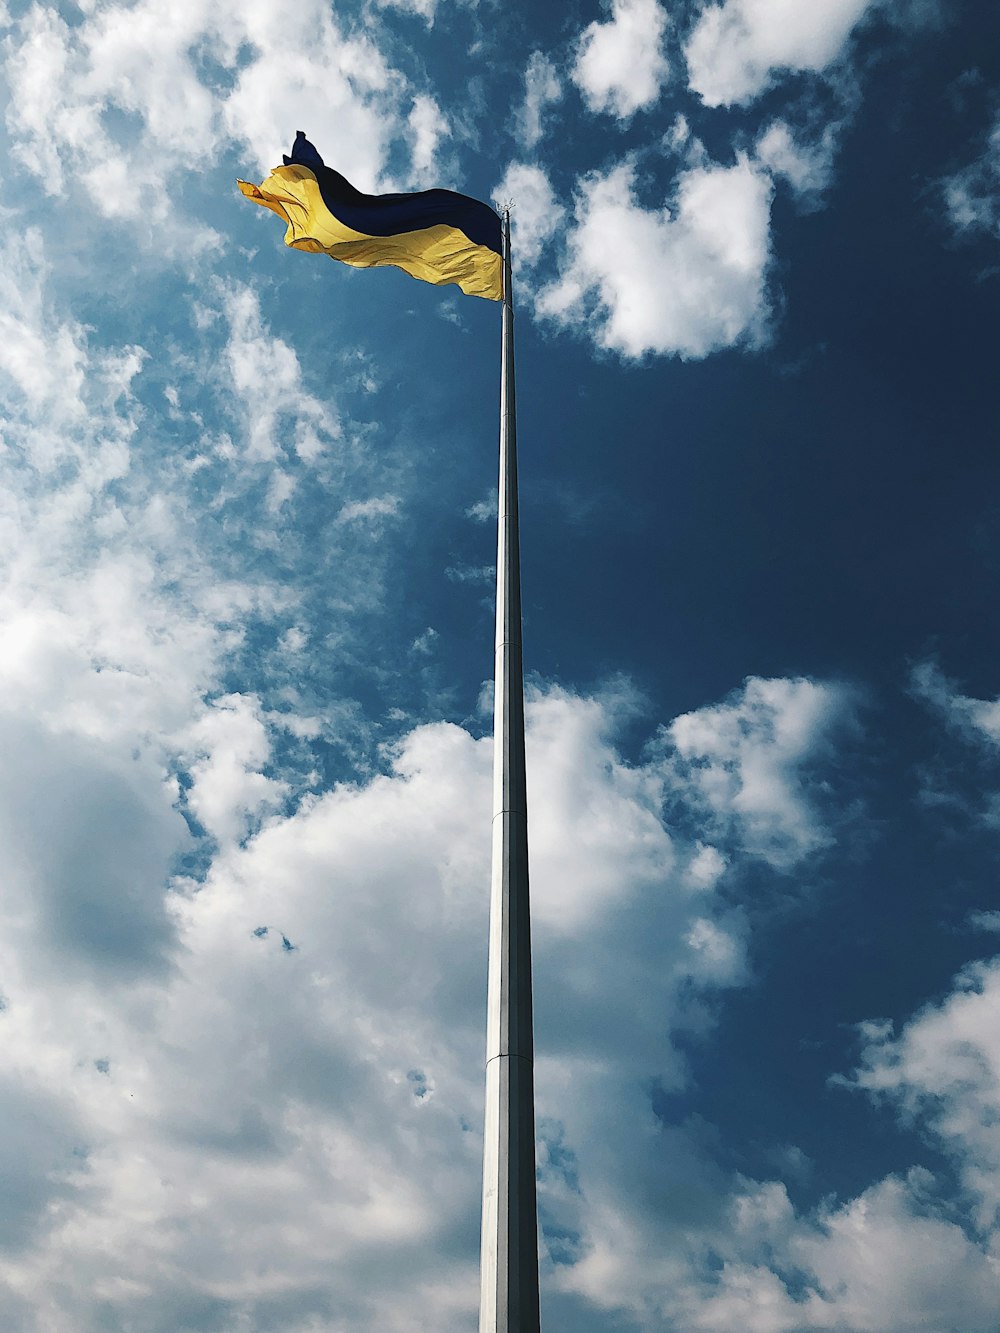 yellow flag under white clouds and blue sky during daytime